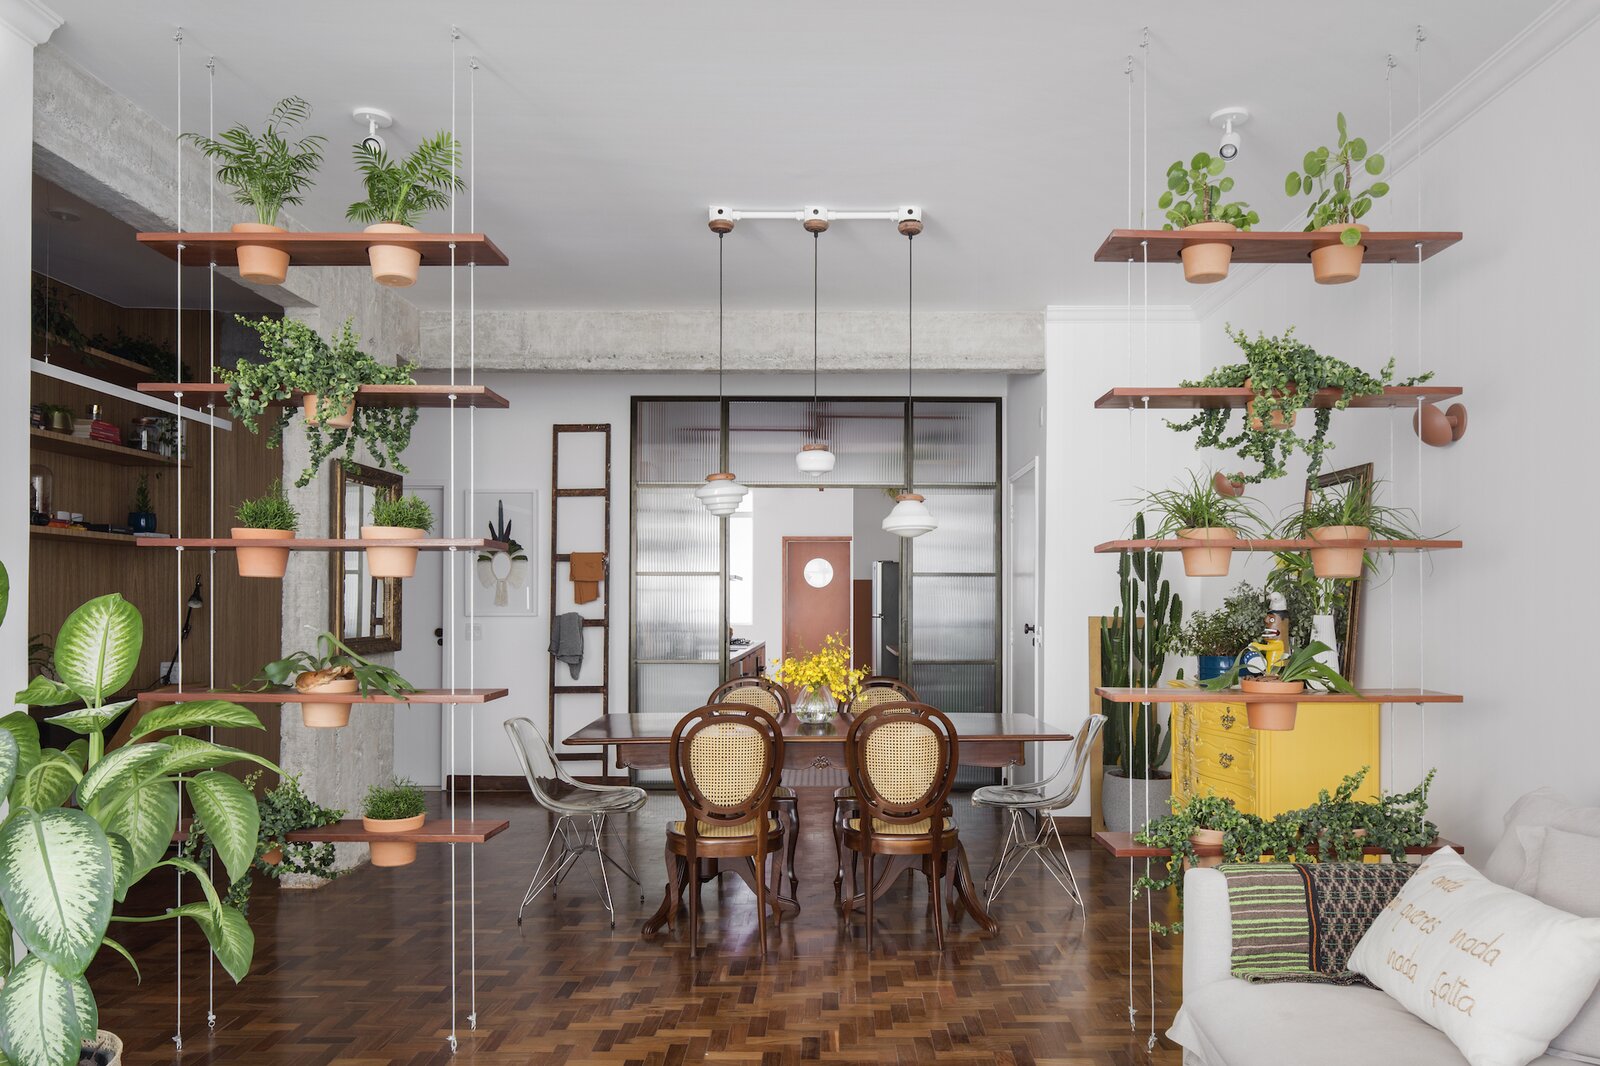 A Deteriorating 1950s Apartment in São Paulo Gets Revamped and Greened-Up